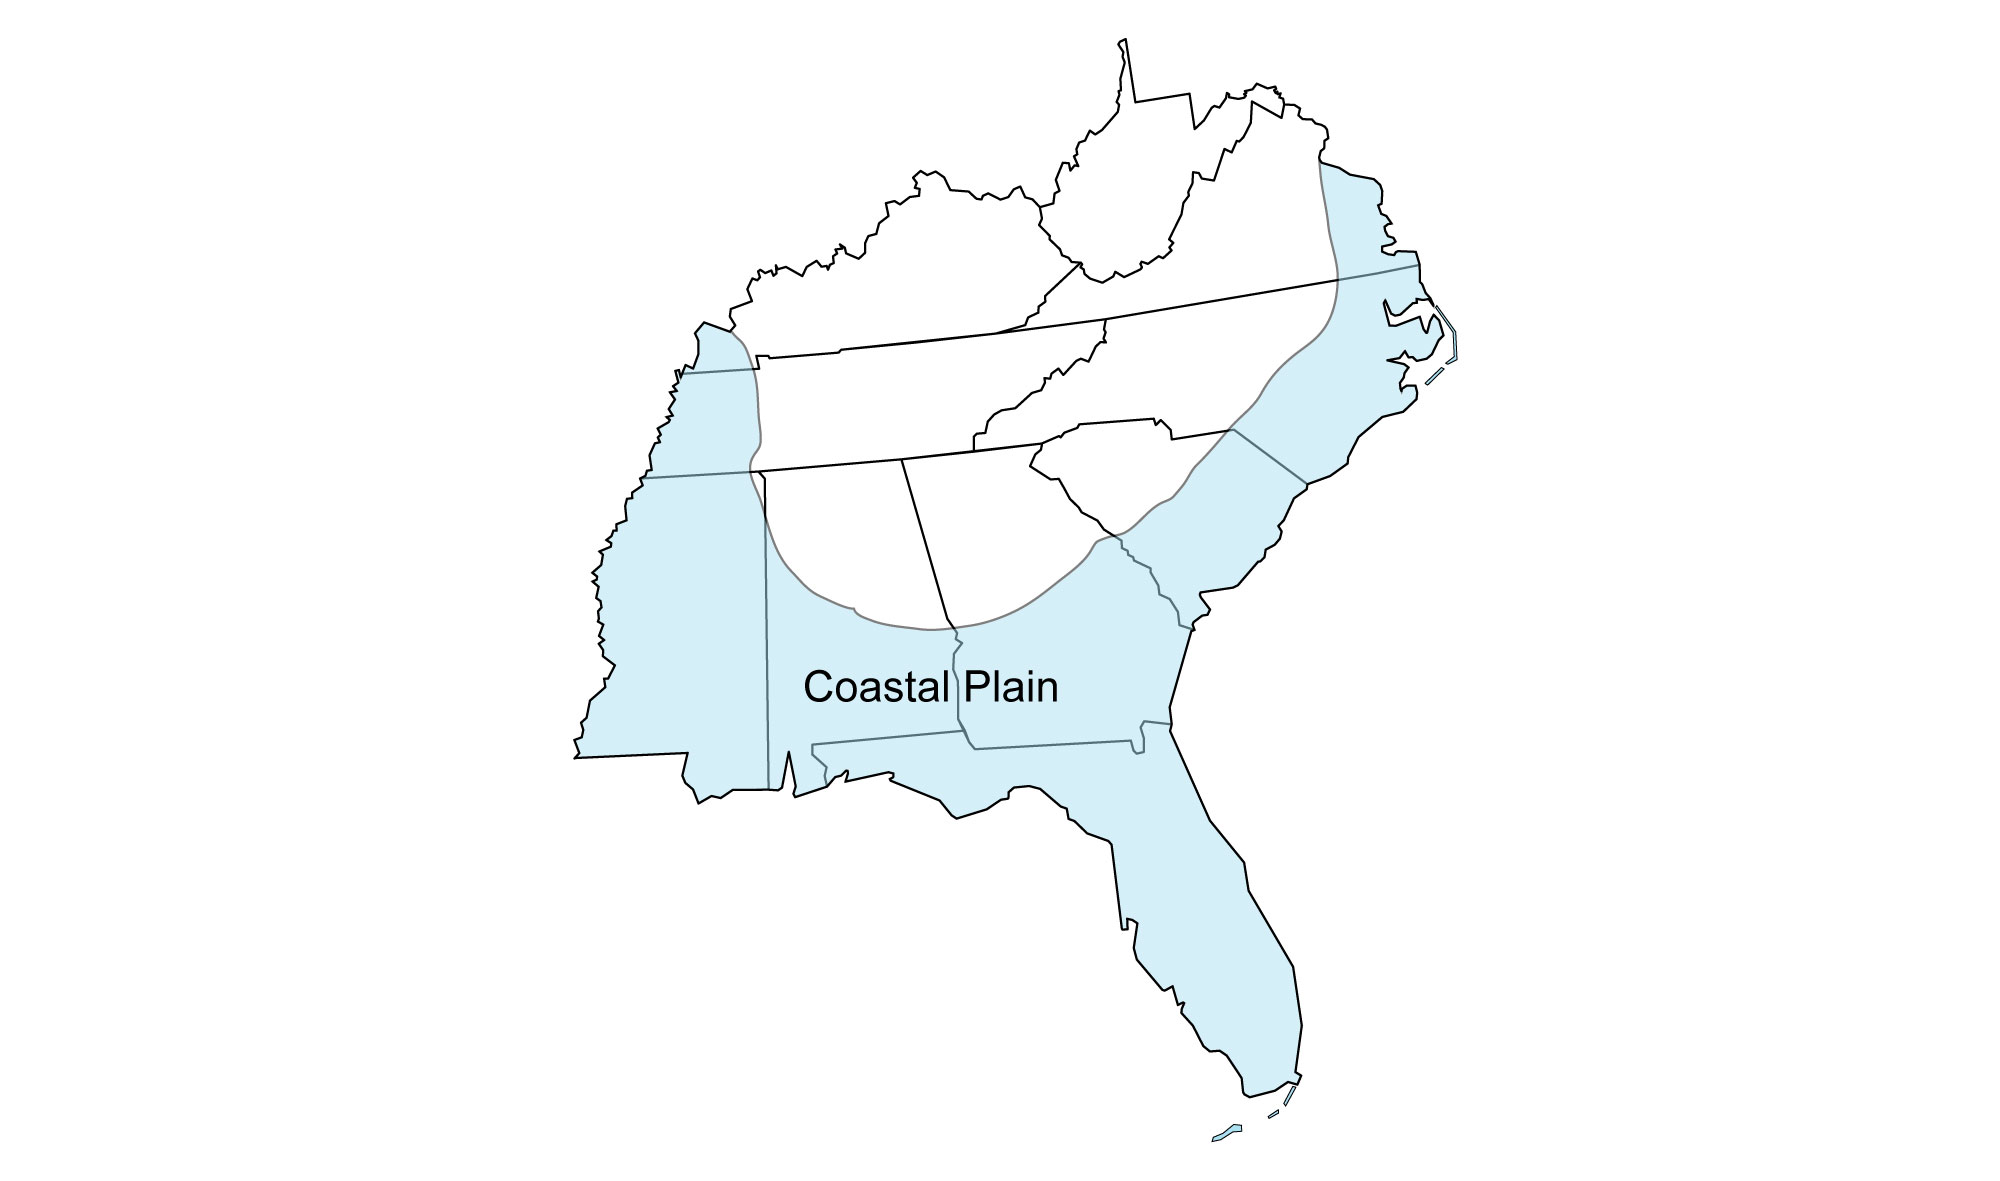 Simple map that shows the extent of the Coastal Plain region of the southeastern United States, which includes all of Florida, most of Mississippi, and portions of Kentucky, Tennessee, Alabama, Georgia, South Carolina, North Carolina, and Virginia.